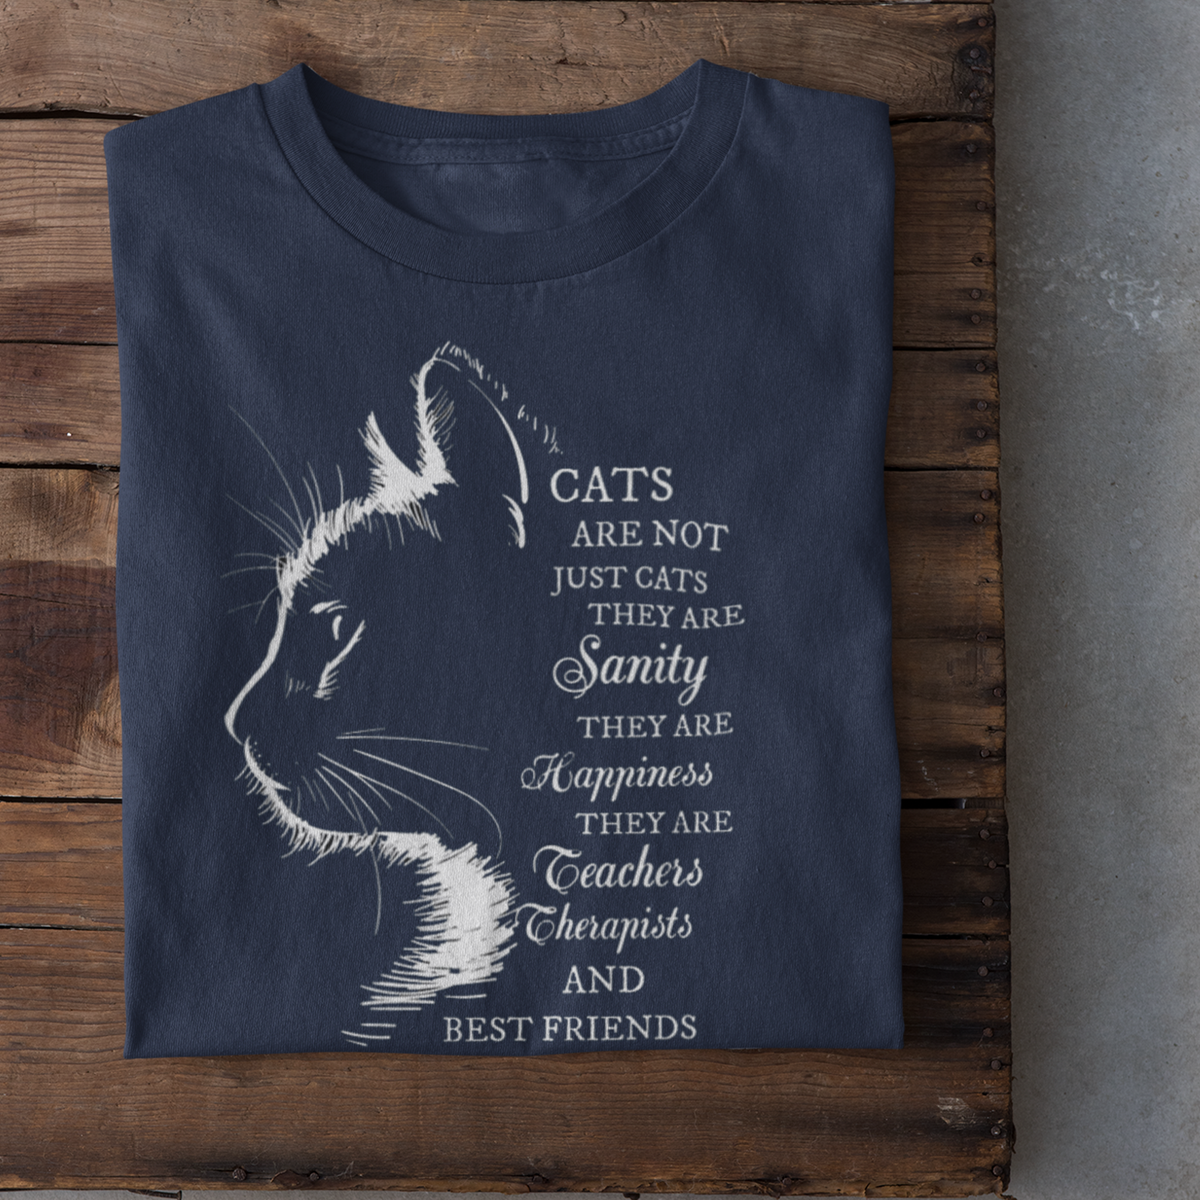 You Are Not Just Cats Shirt, Cat Lover Shirt, Gift For Cat Lover - Personalized T-shirt